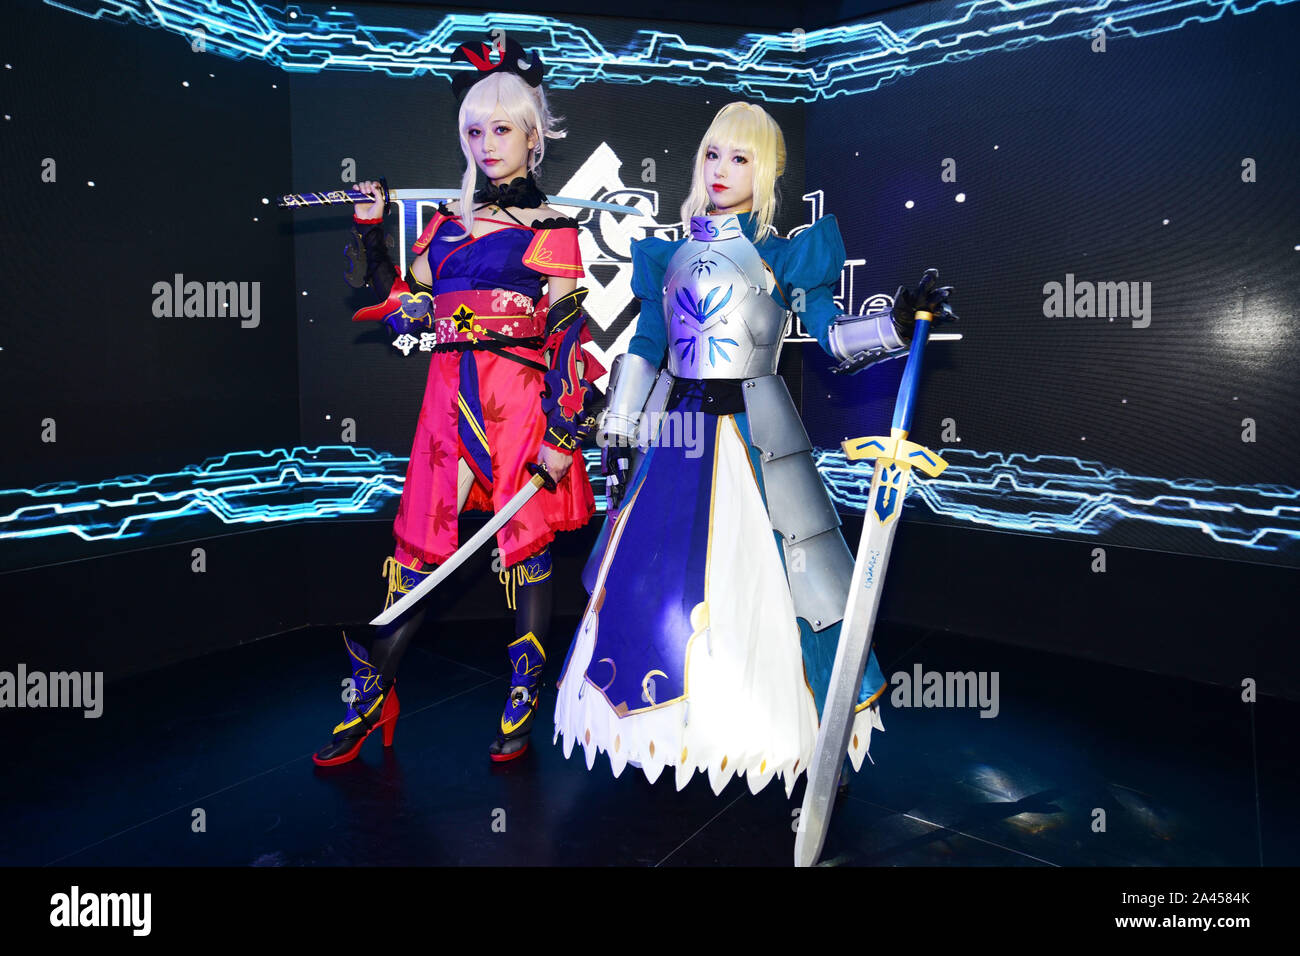 Chinese showgirls dressed in cosplay costumes featuring Miyamoto Musashi and Saber, whose real name is Artoria Pendragon, from 'Fate/Grand Order' pose Stock Photo